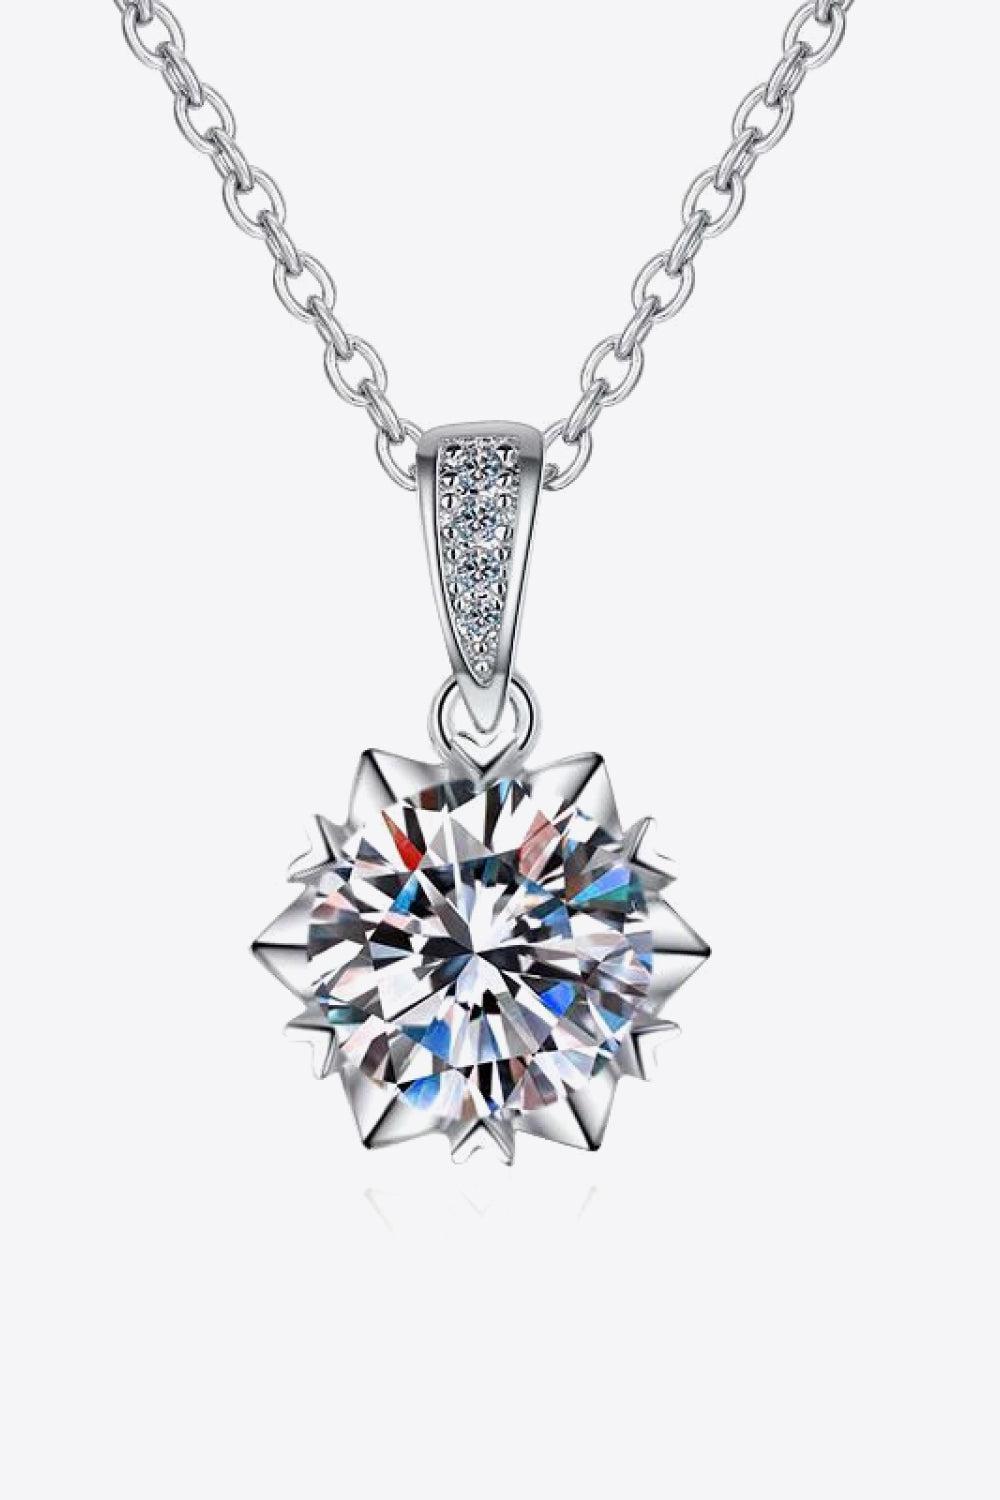 Looking At You 2 Carat Moissanite Pendant Necklace BLUE ZONE PLANET